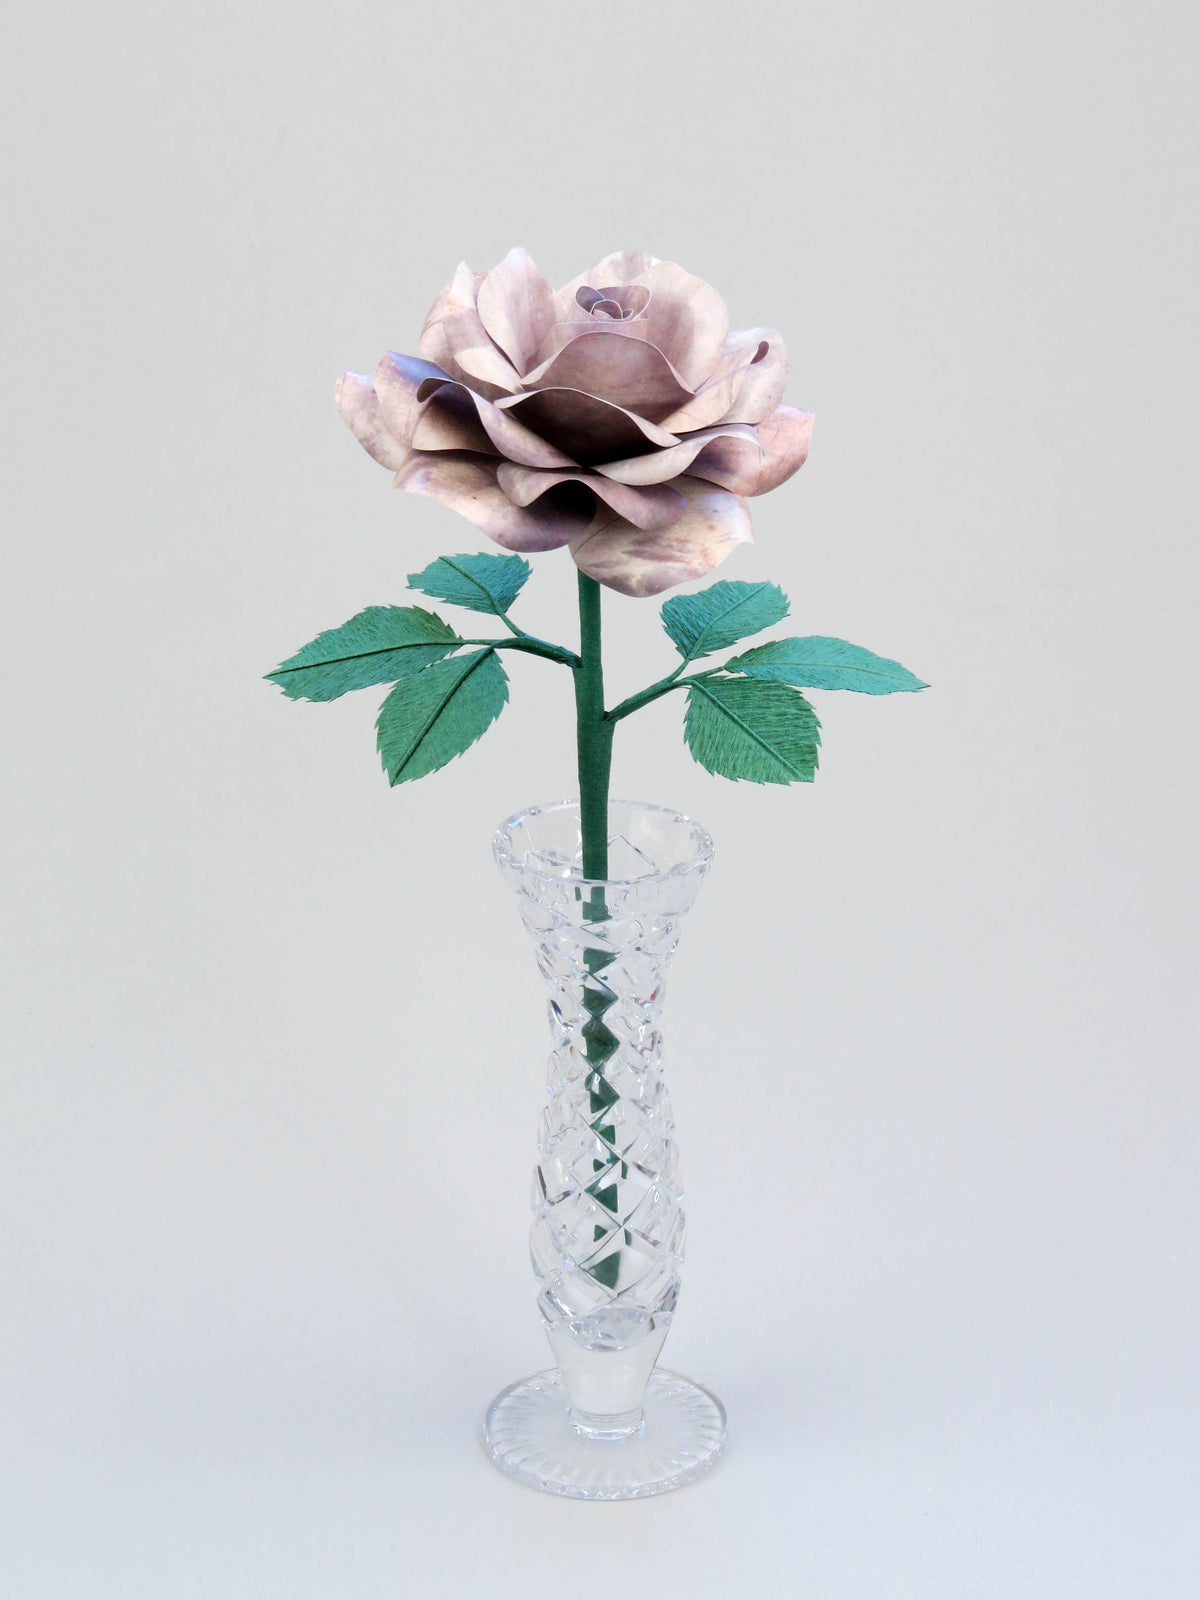 Light grey tin paper rose with six forest green leaves standing in a narrow glass vase set against a light grey background